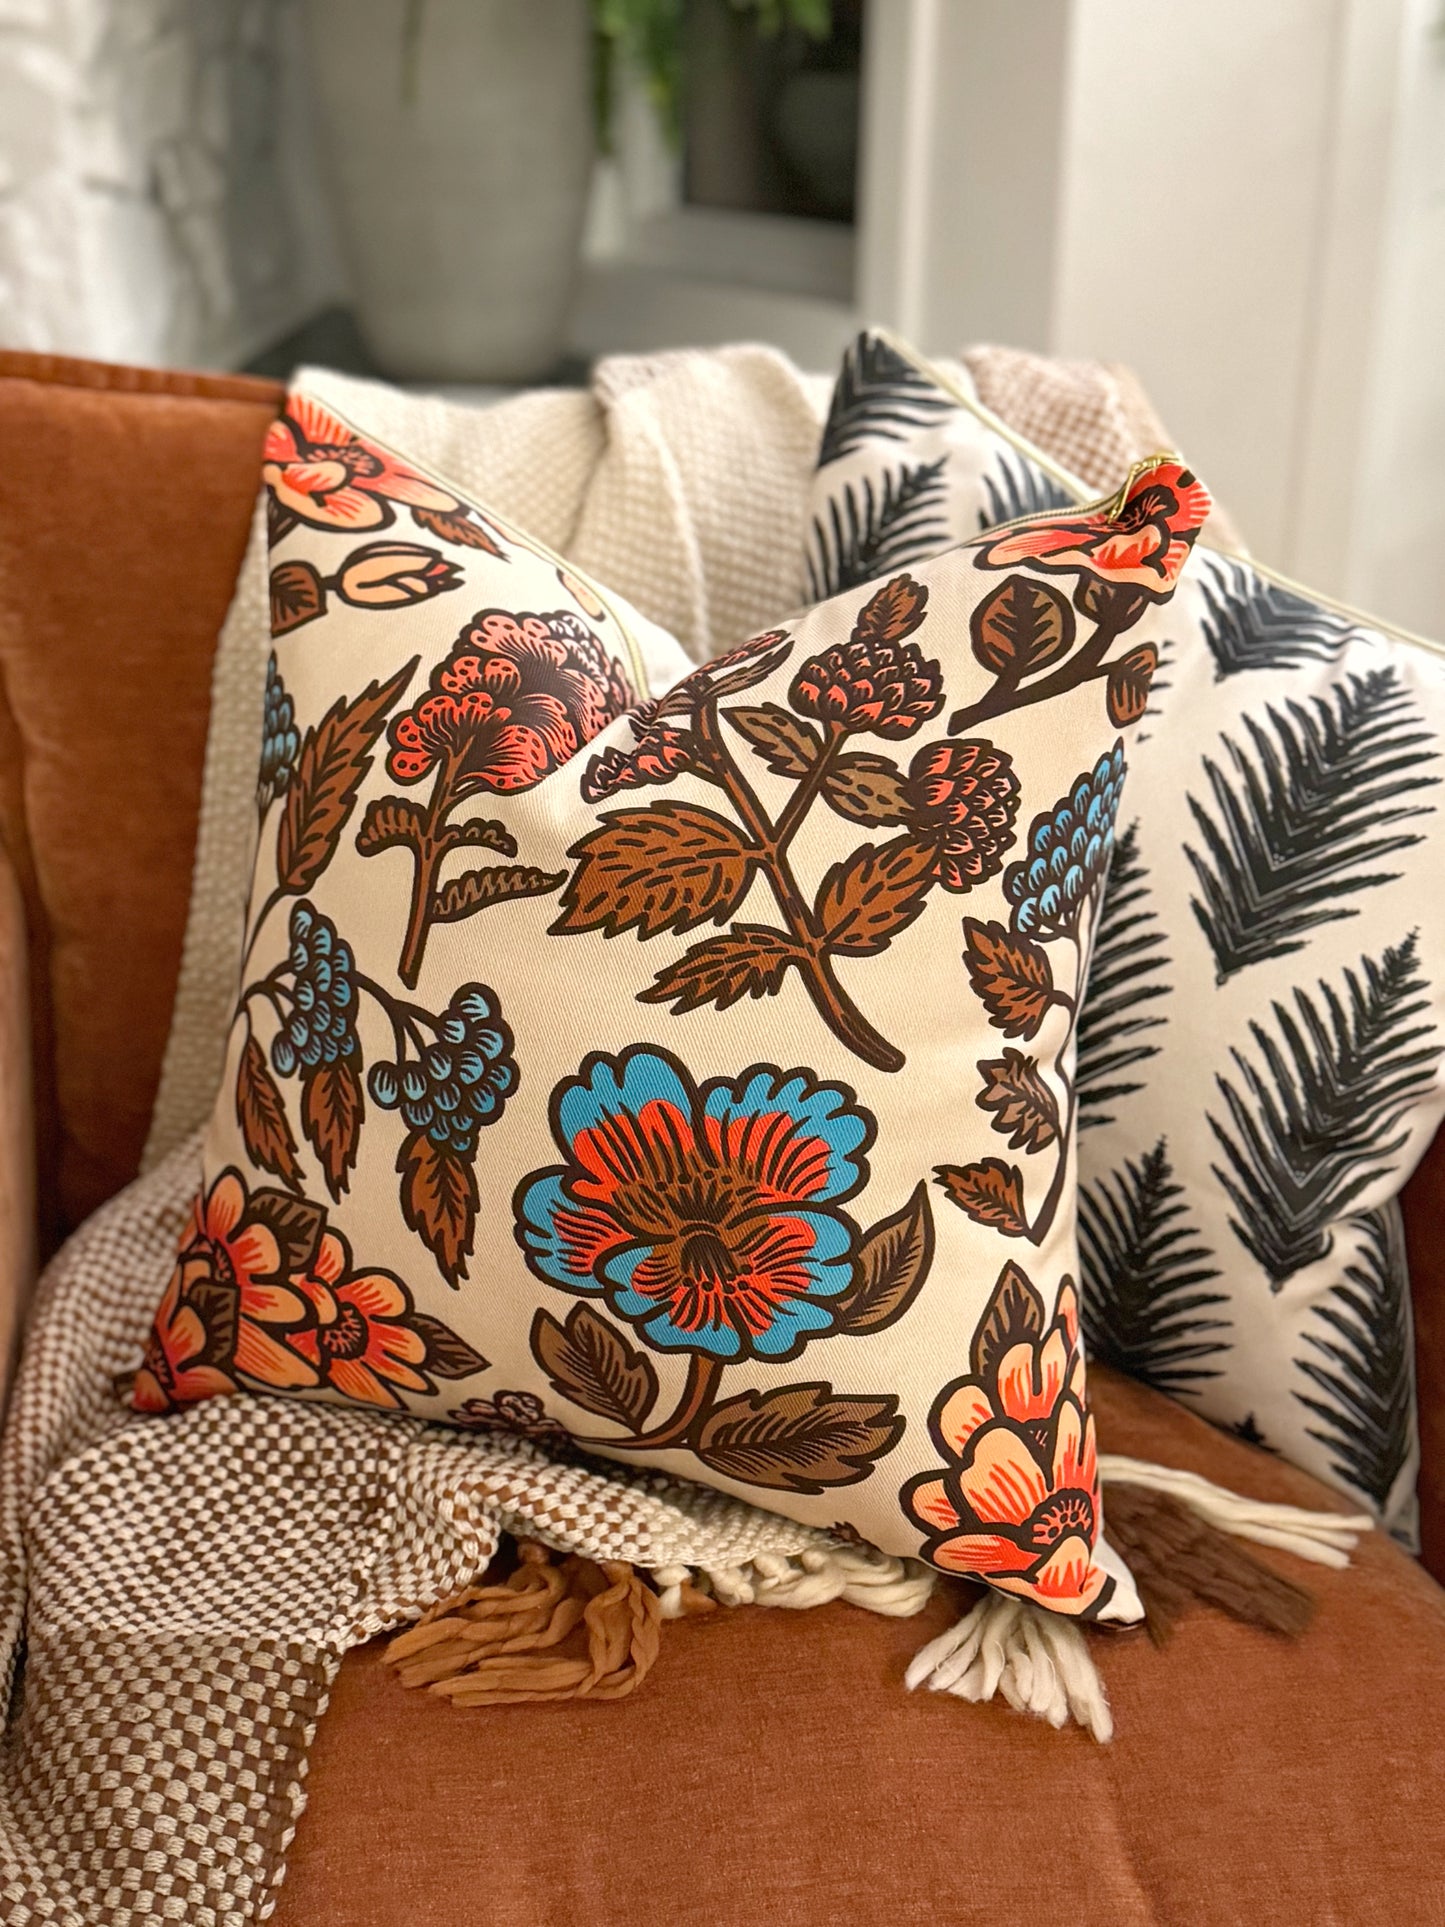 LULU Floral Pillow Cover - Designed by Holli Zollinger